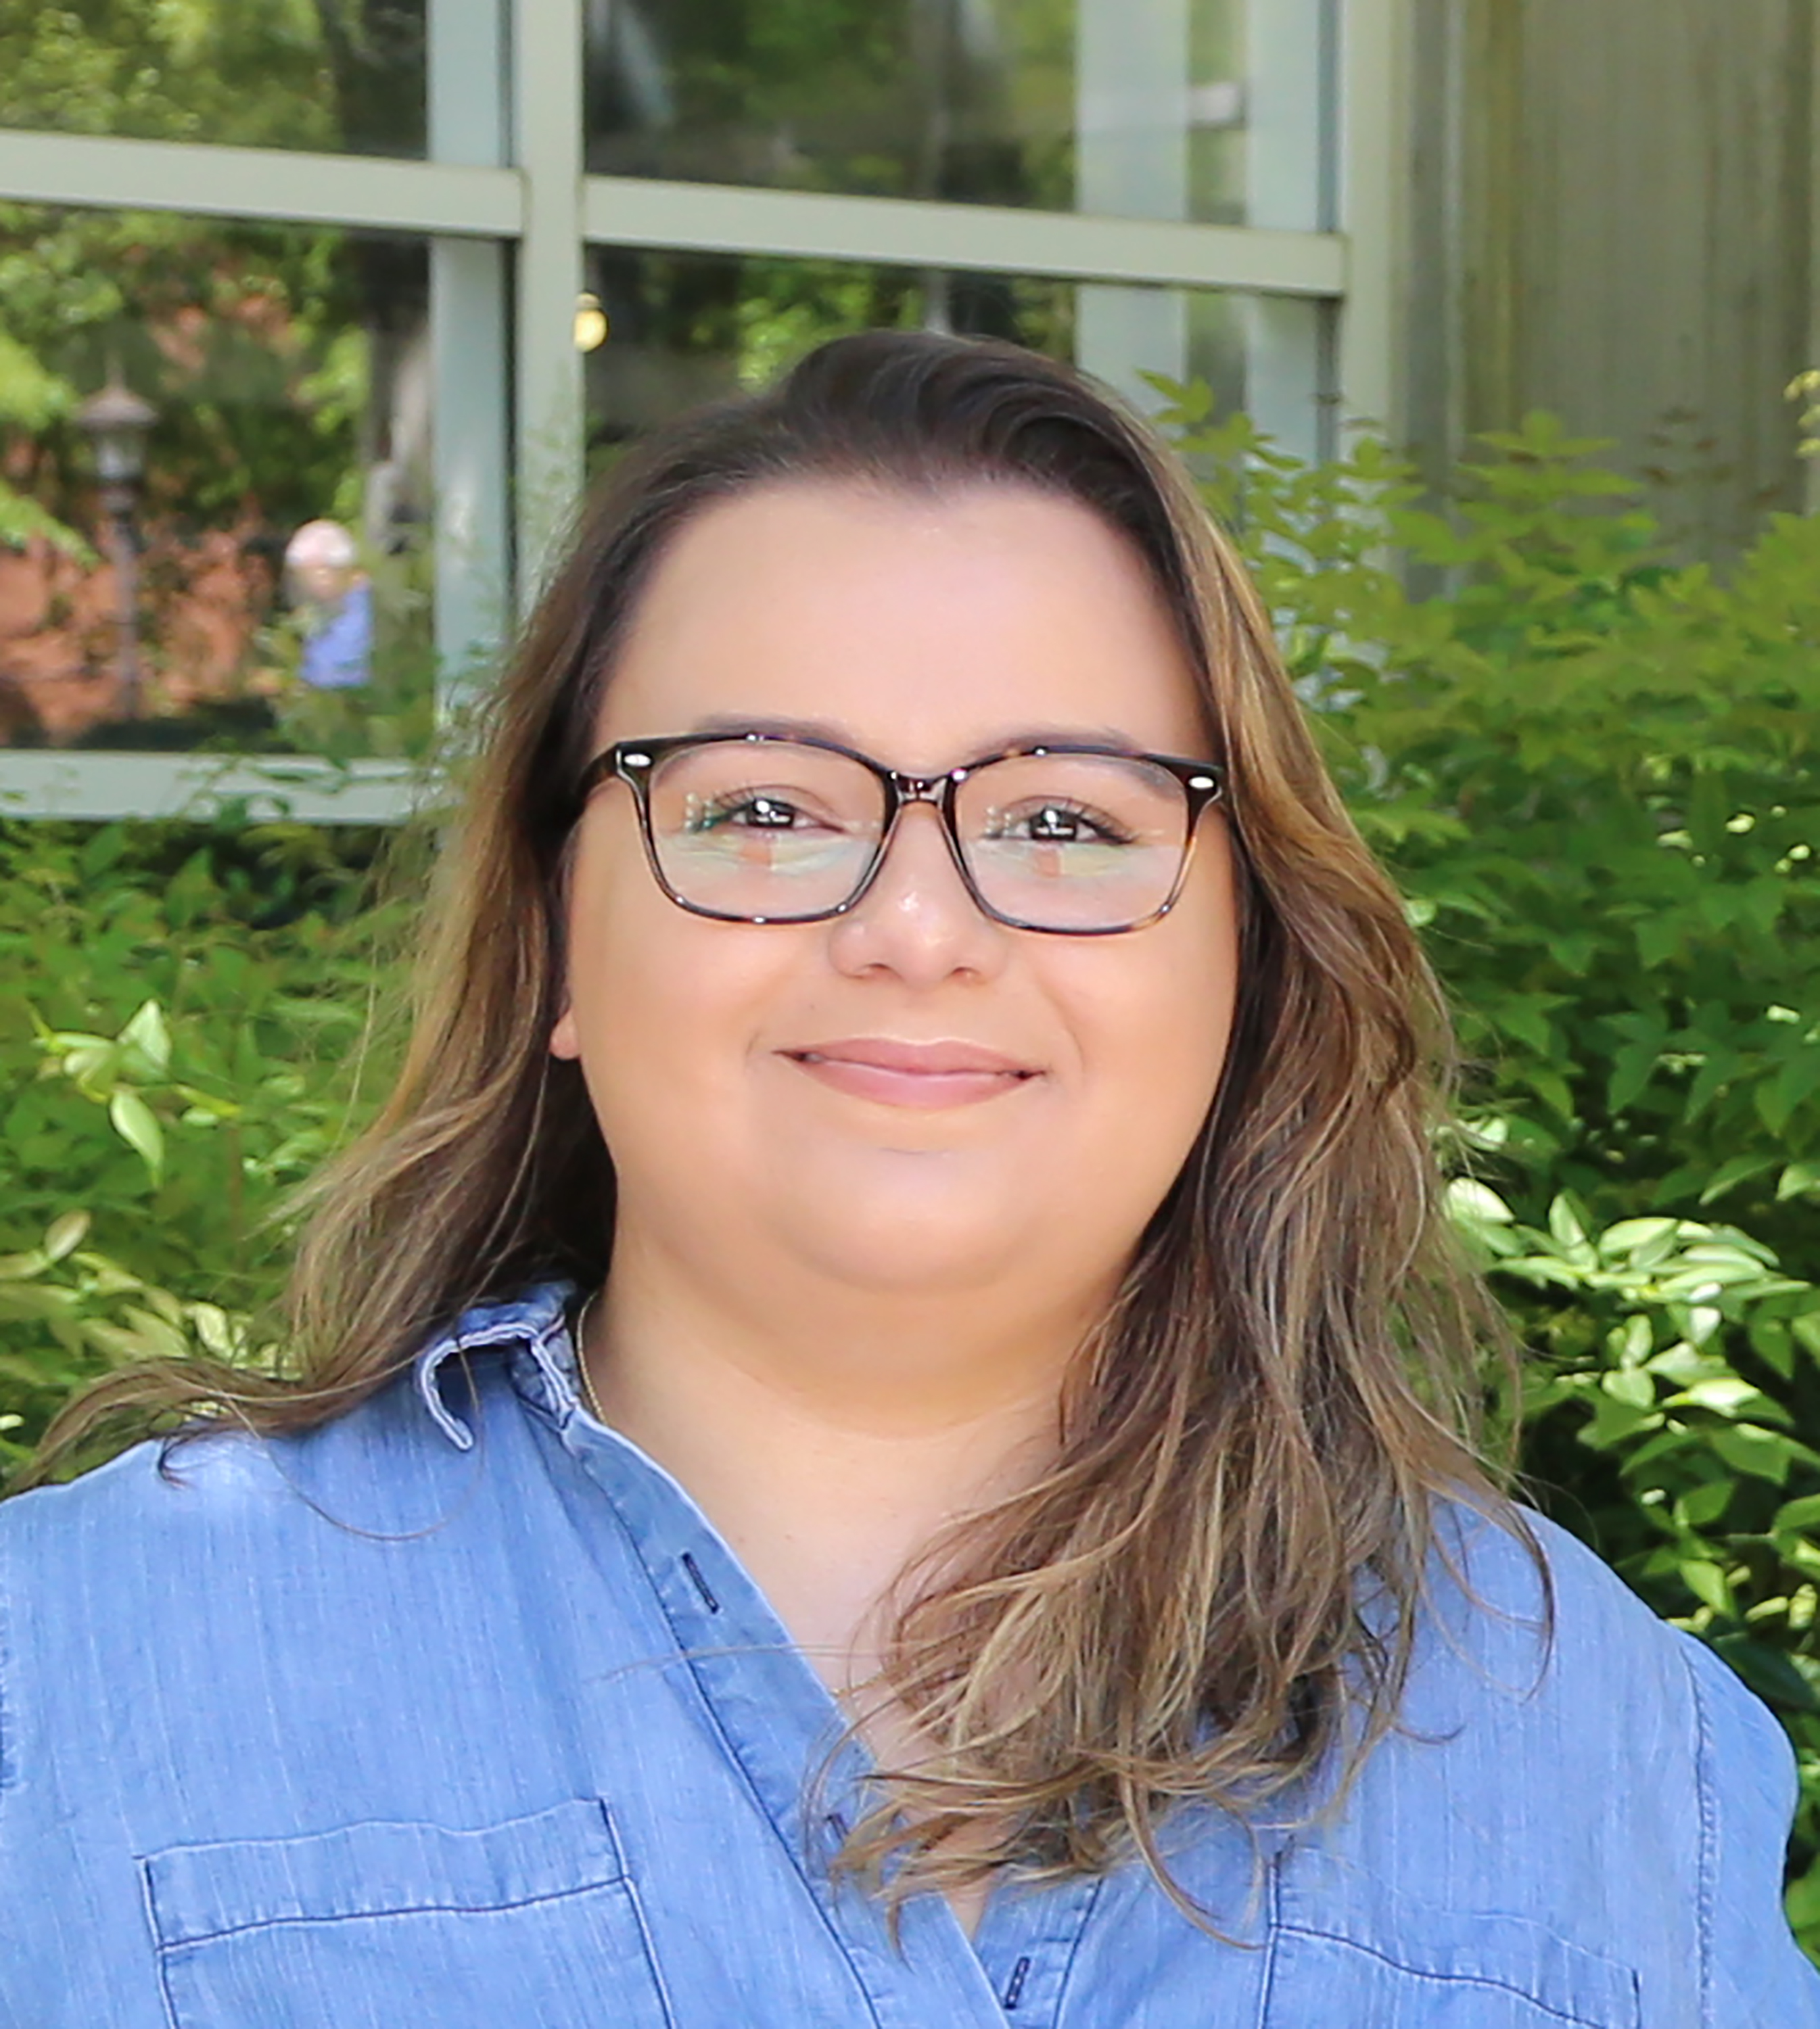 Paula Torres-Wilcken is a Campus Services Student Spotlight for Spring Semester 2019